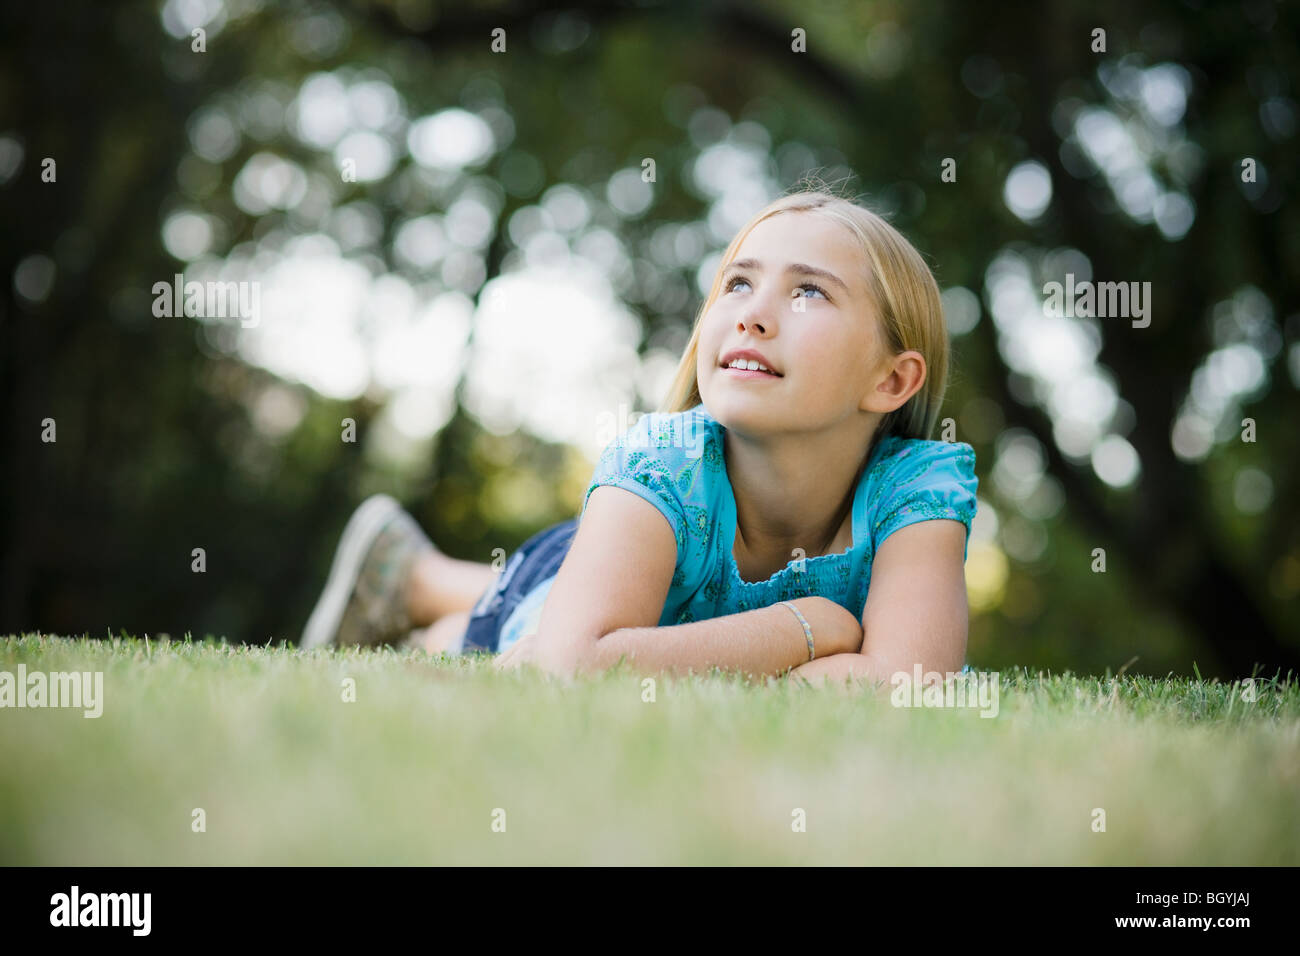 Young girl lying on grass Stock Photo